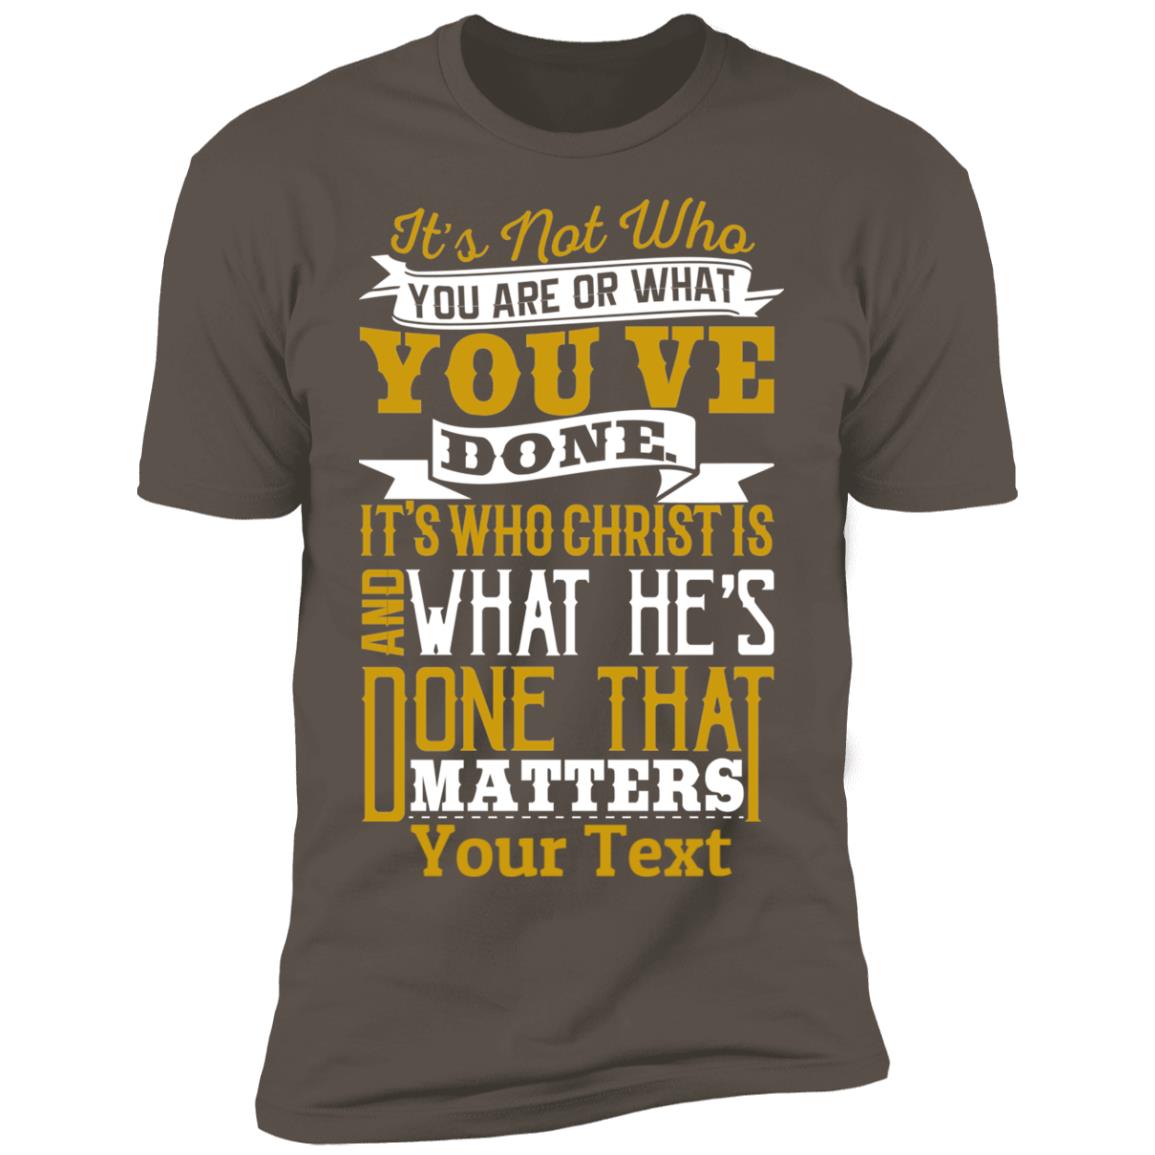 T-Shirts - Personalized Christian Themed T-shirts - It's What Christ Has Done - Gold/White